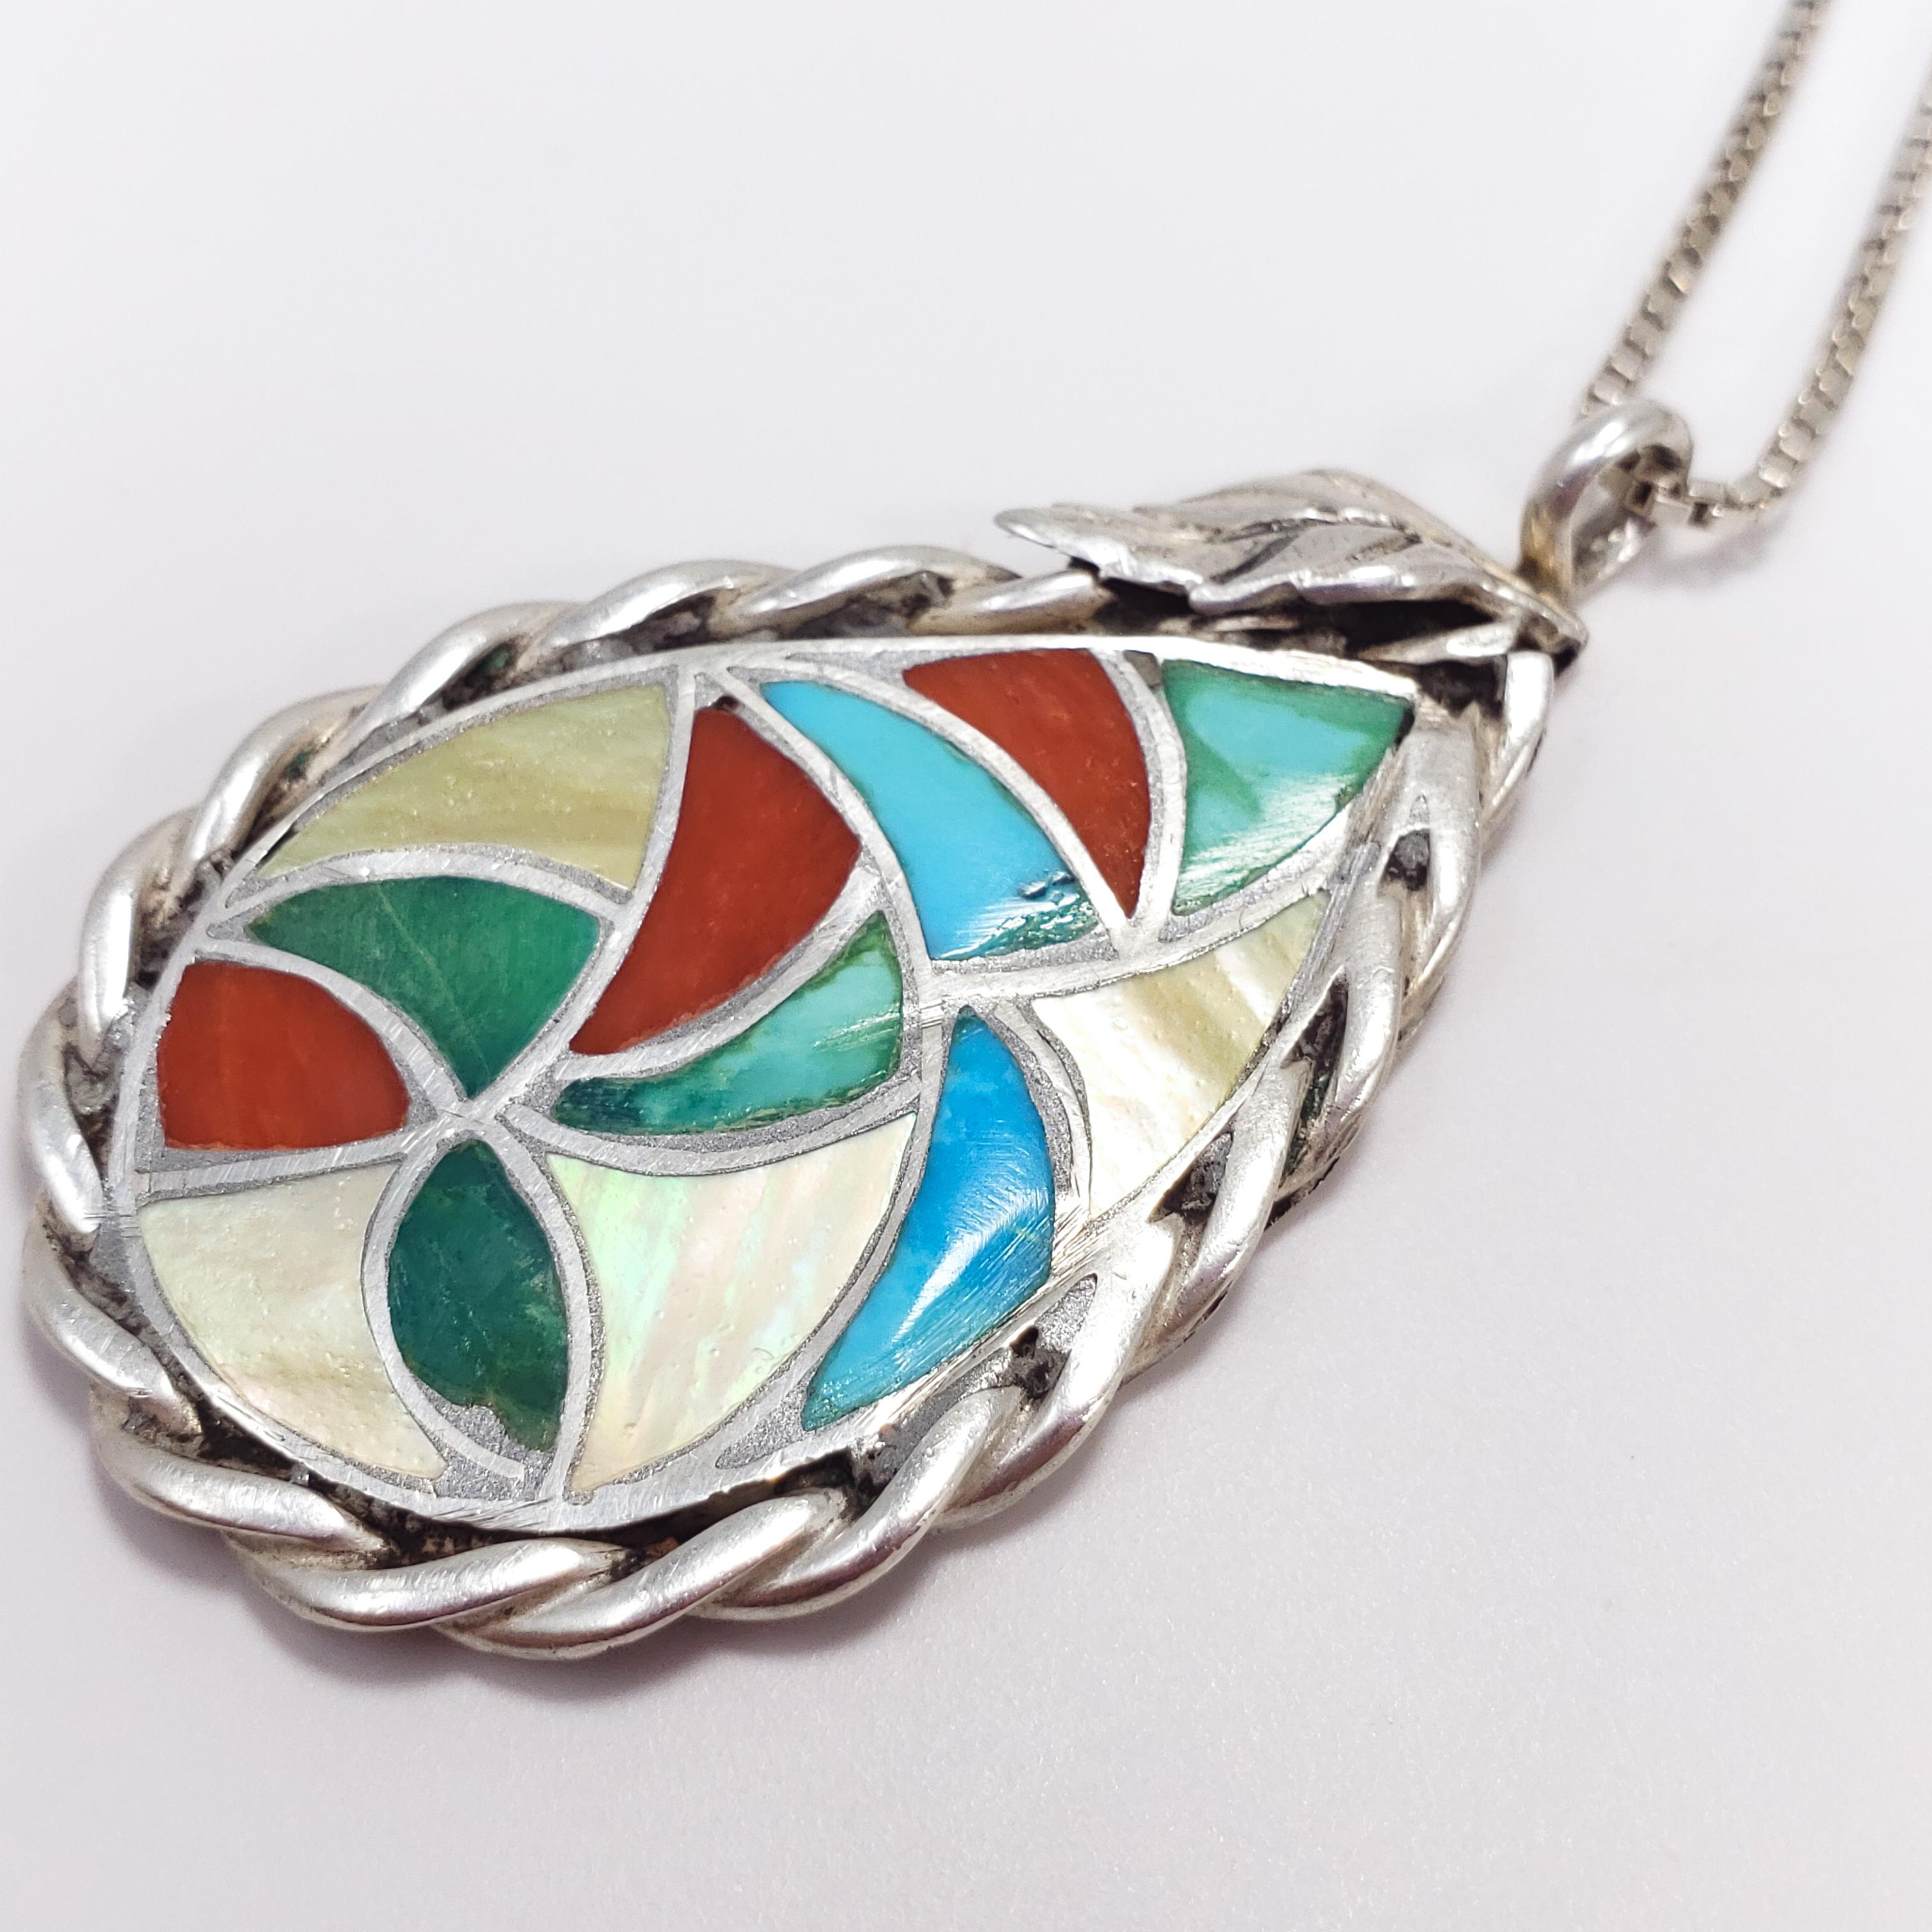 Women's or Men's Zuni Native American Pendant Necklace Coral & Turquoise Inlay in Sterling Silver